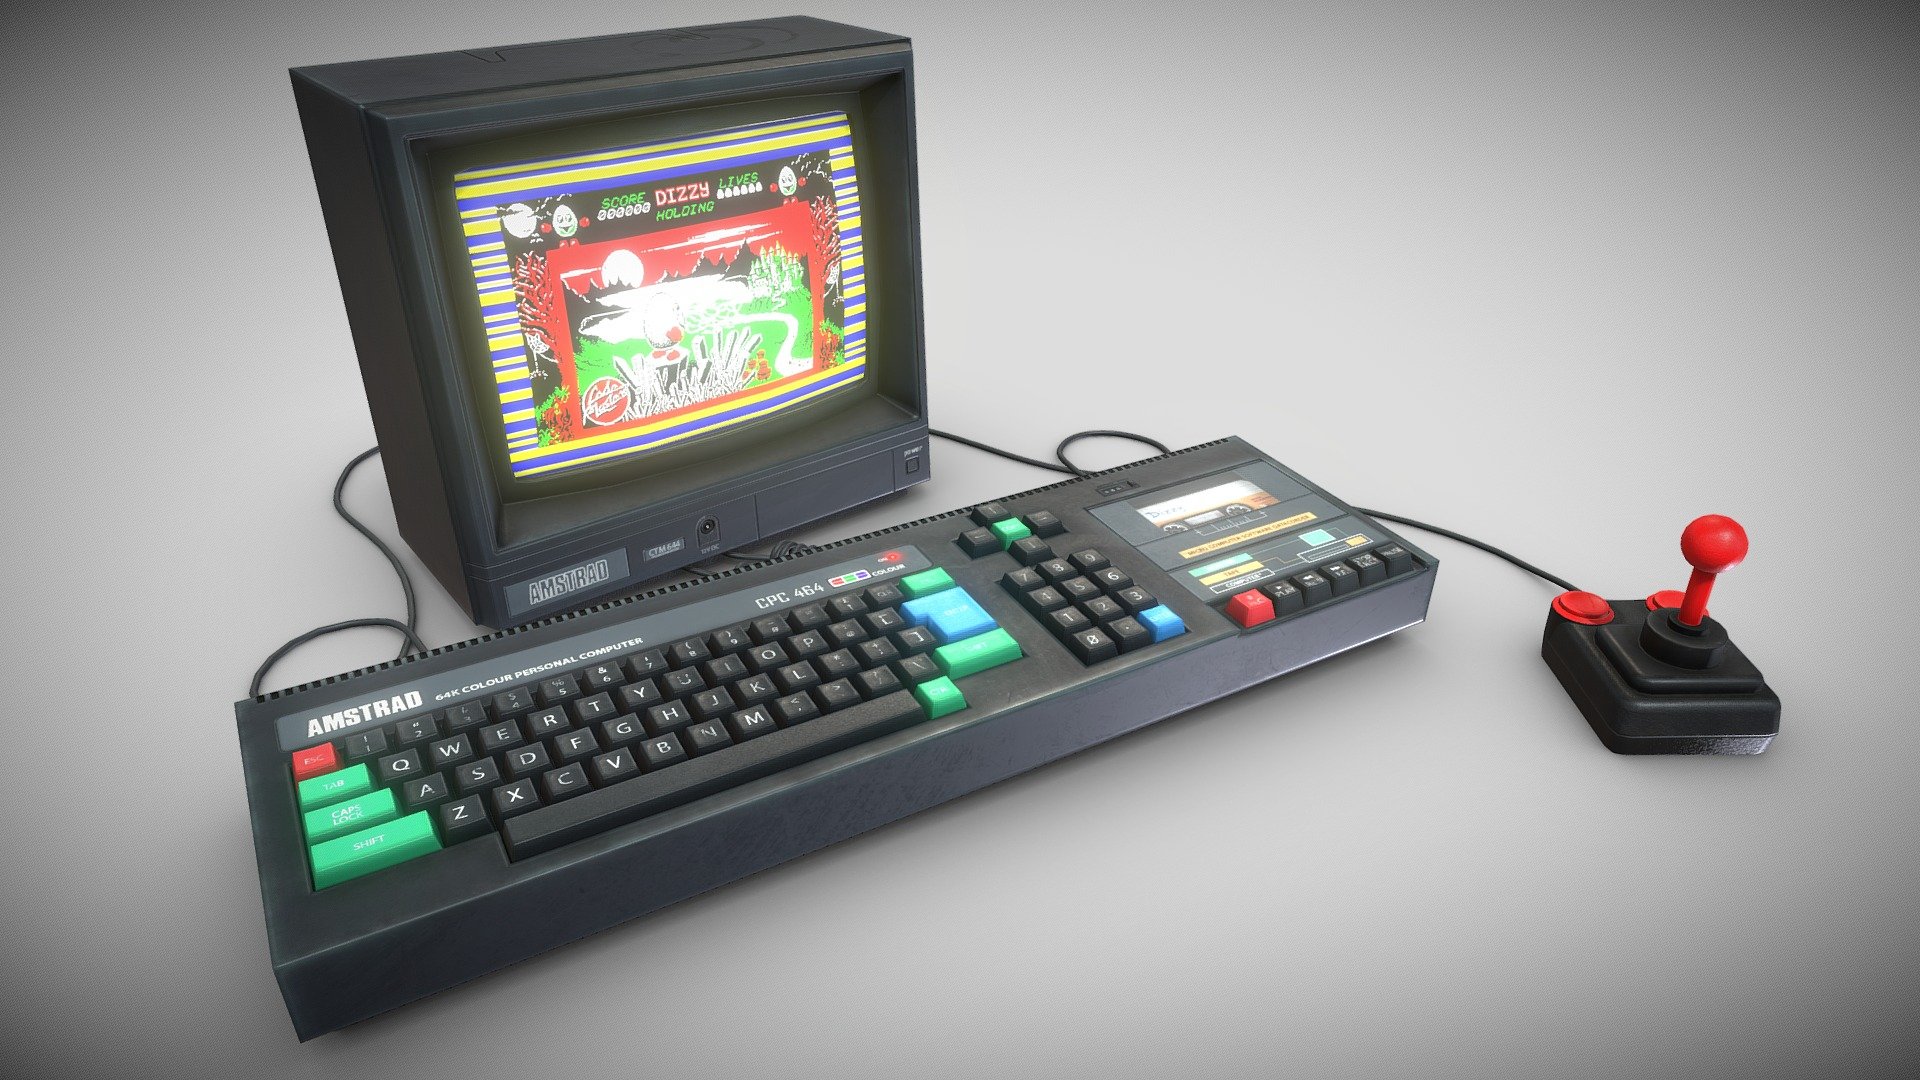 Retro gaming in the 1980s. the Amstrad was one of the 8 bit machines of the era that paved the way for the consoles to come.

Modelled in 3ds Max with a mid-poly bake down and then fully textured in Quixel Mixer 2020. I wanted to add a hint of life with some motion in the tape cassette and classic loading screen. 

Texture setup:
 - 2048x2048 texture maps
 - PBR Metalness setup 
 - Additional maps to assist with emissive and alpha segments

Included:
the textures for my personal version of the same asset which can be seen here
 - https://skfb.ly/o6ZIq - Amstrad CPC 464 - Buy Royalty Free 3D model by Wayne Pratt (@ebanimations) 3d model